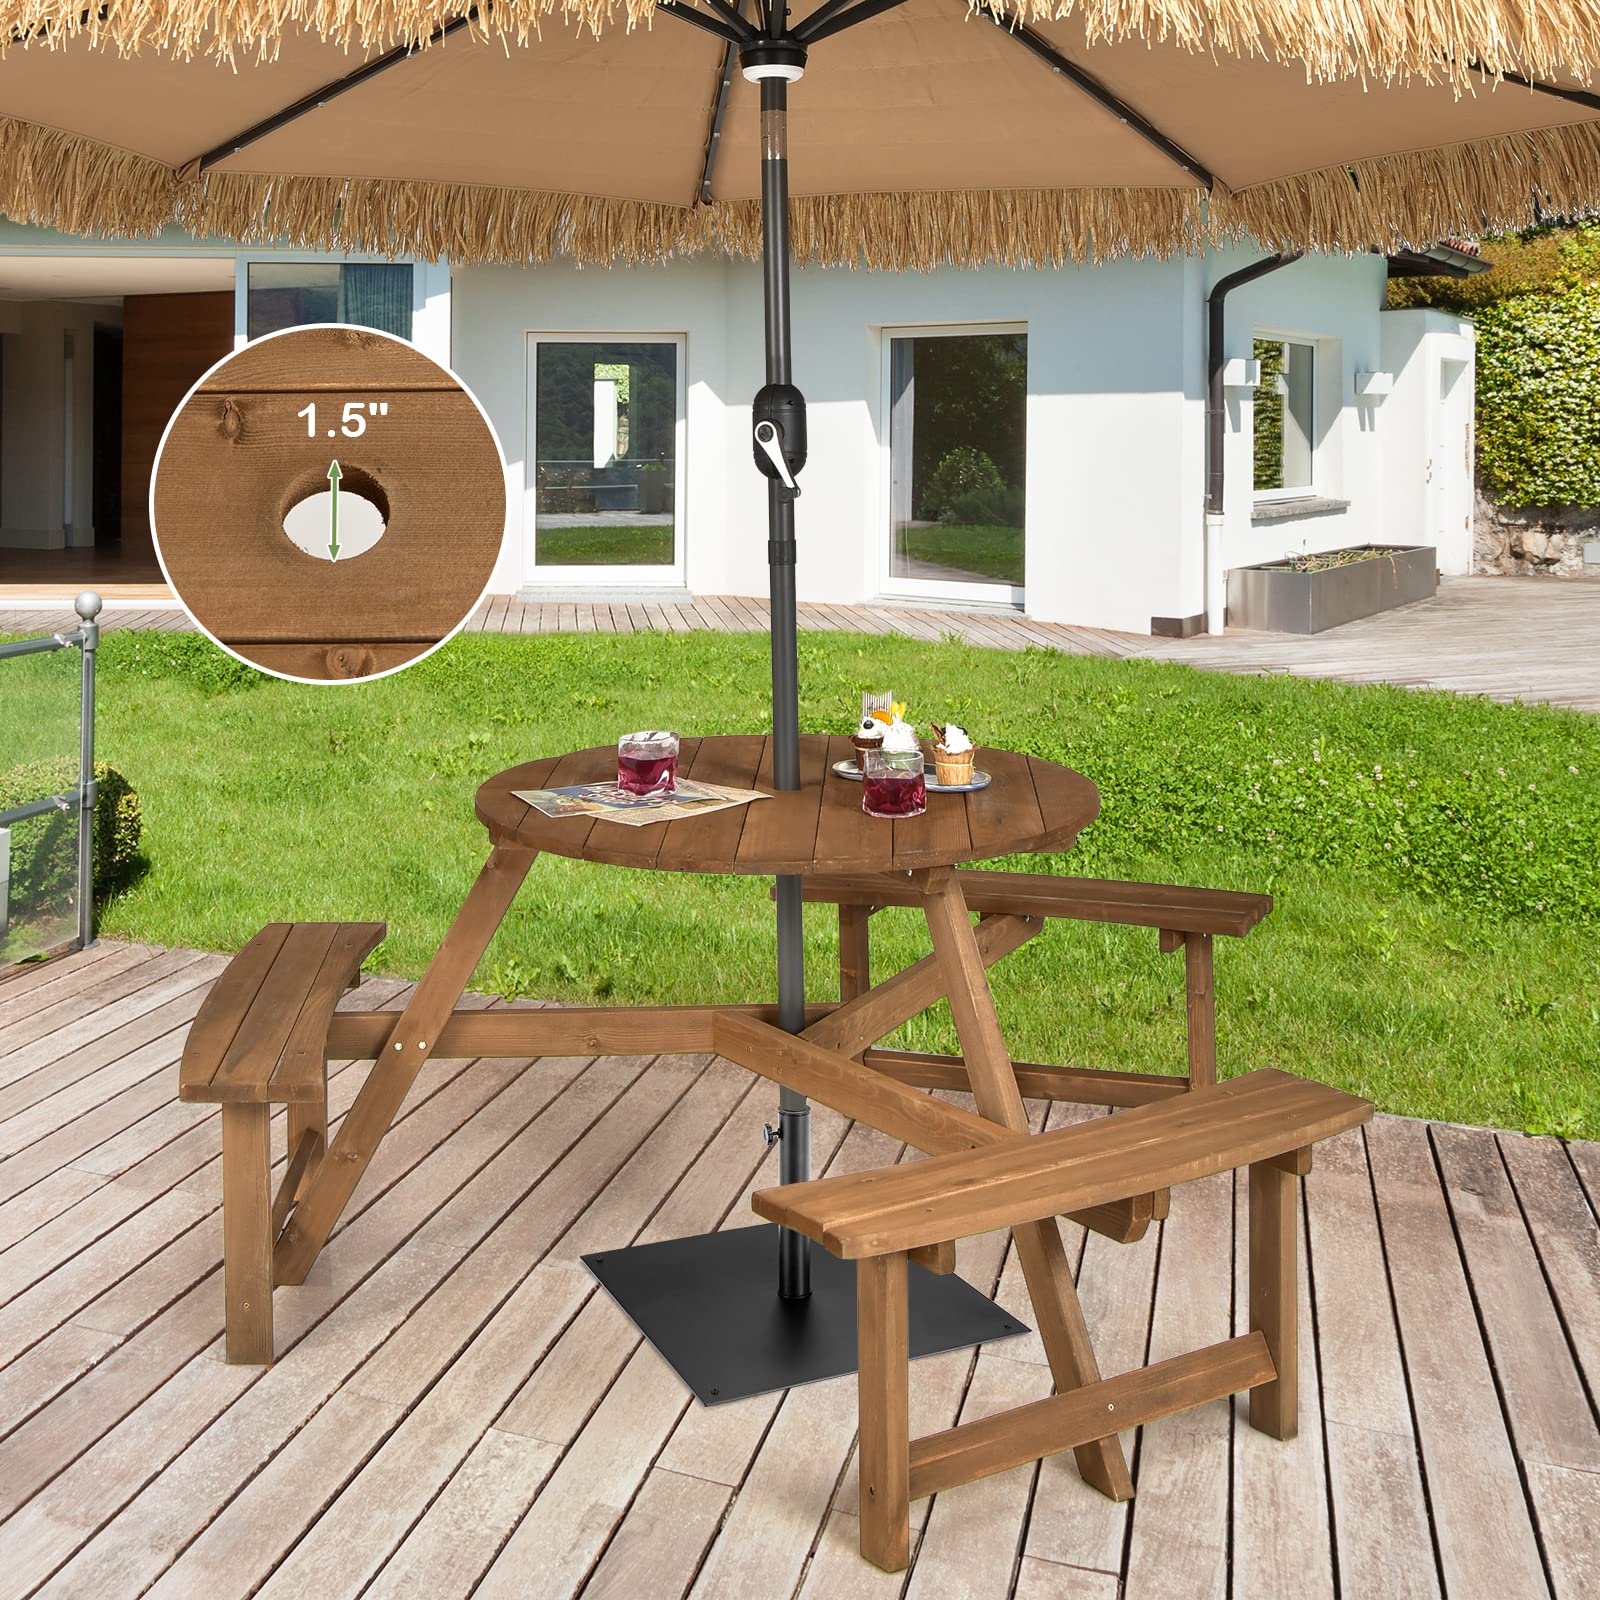 Giantex Wooden Picnic Table for 6 Person, Round Outdoor Table with 3 Benches, Umbrella Hole